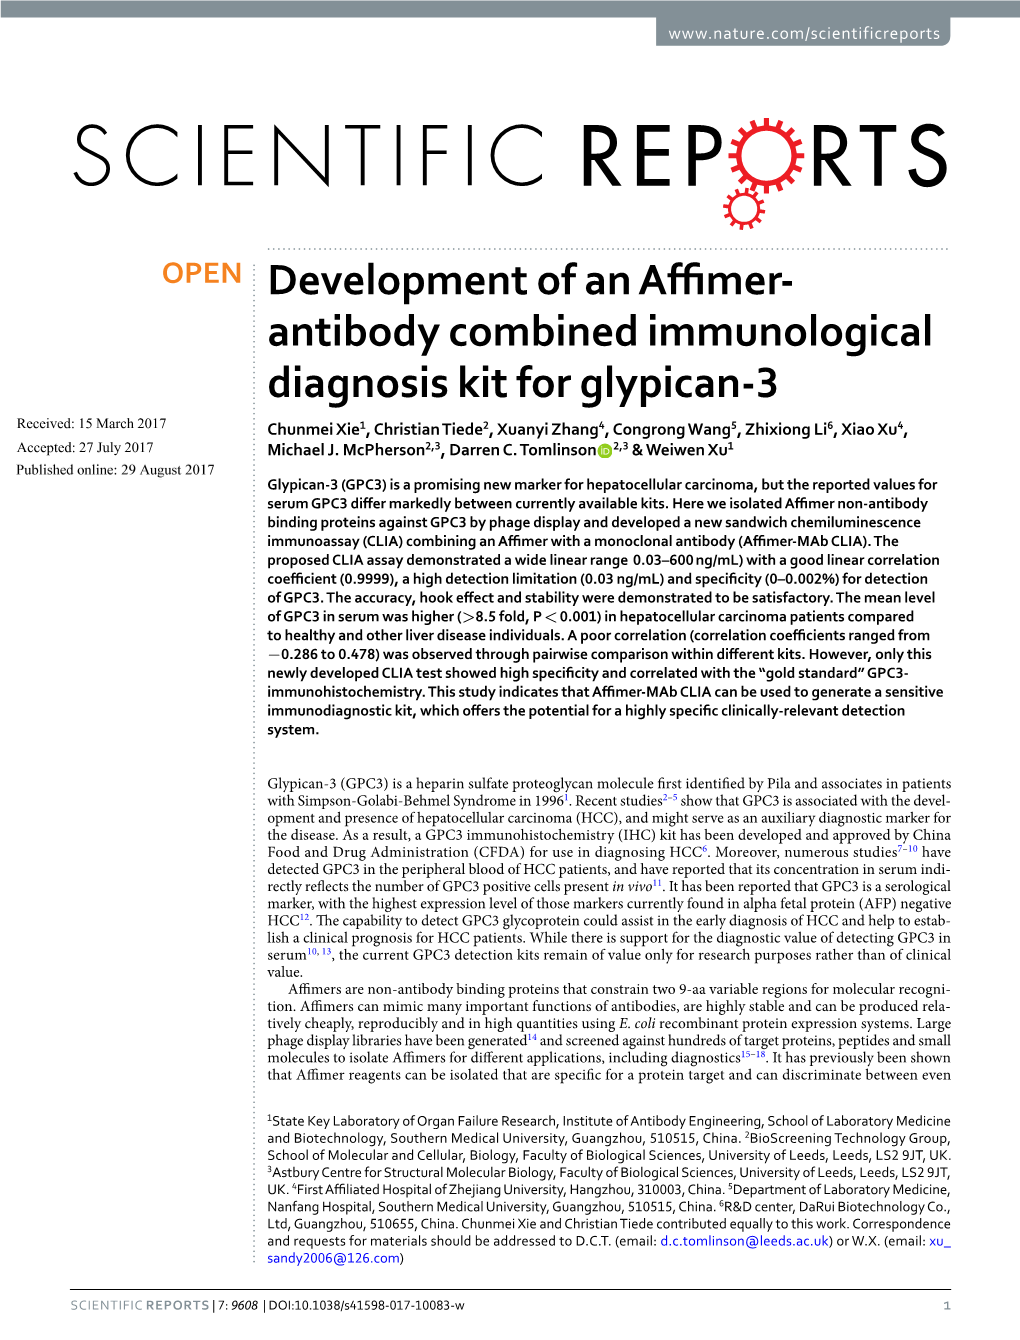 Development of an Affimer-Antibody Combined Immunological Diagnosis